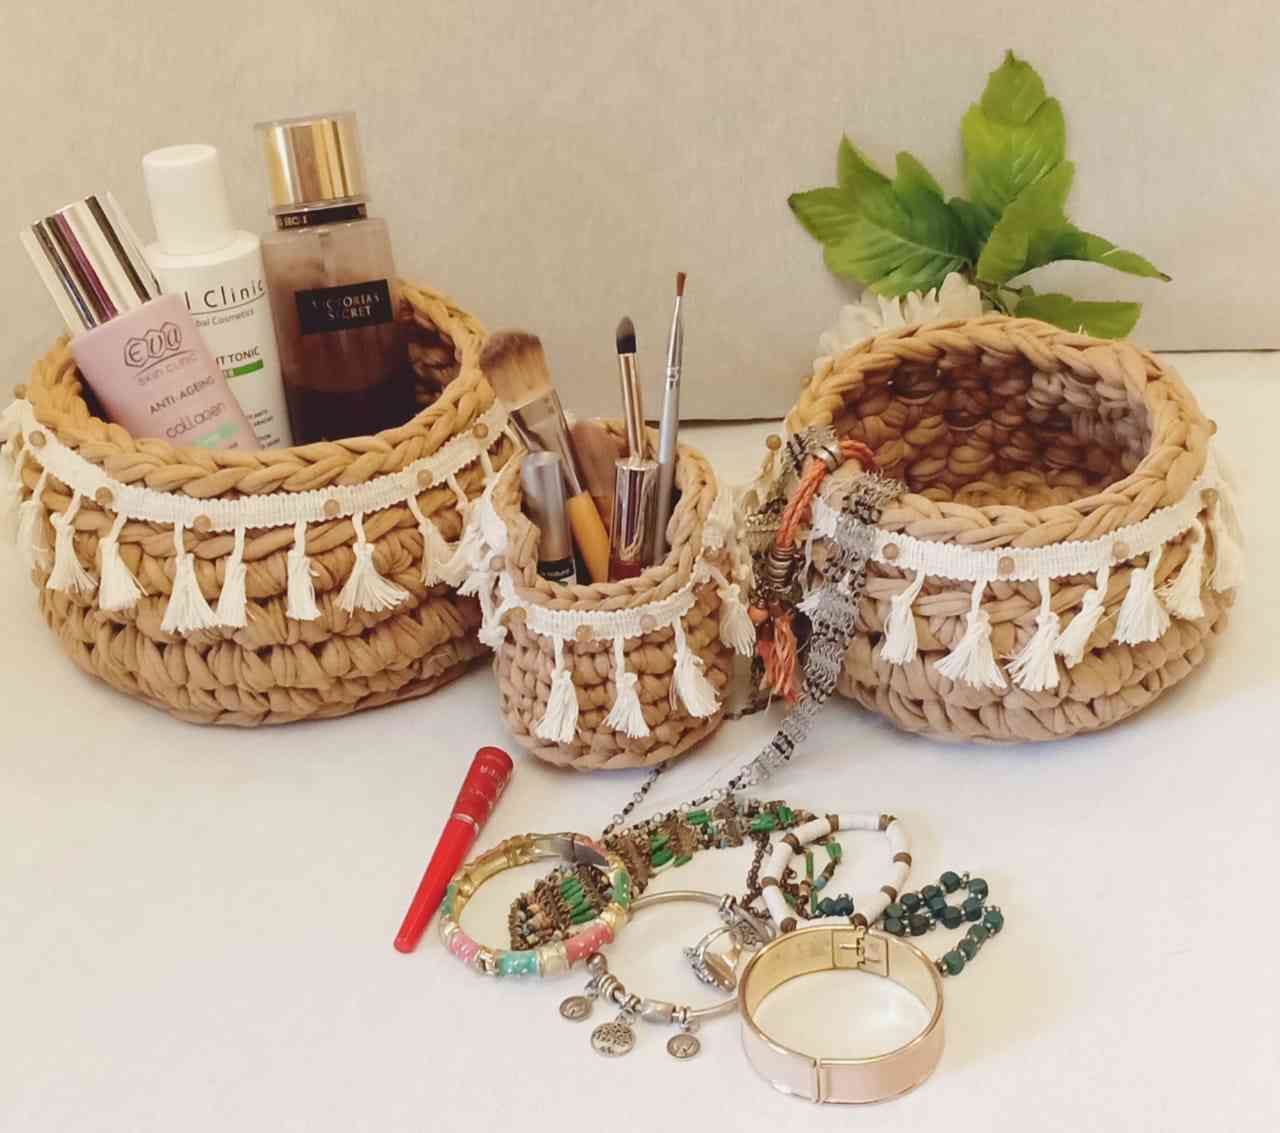 3 basket of different sizes made of kilim thread